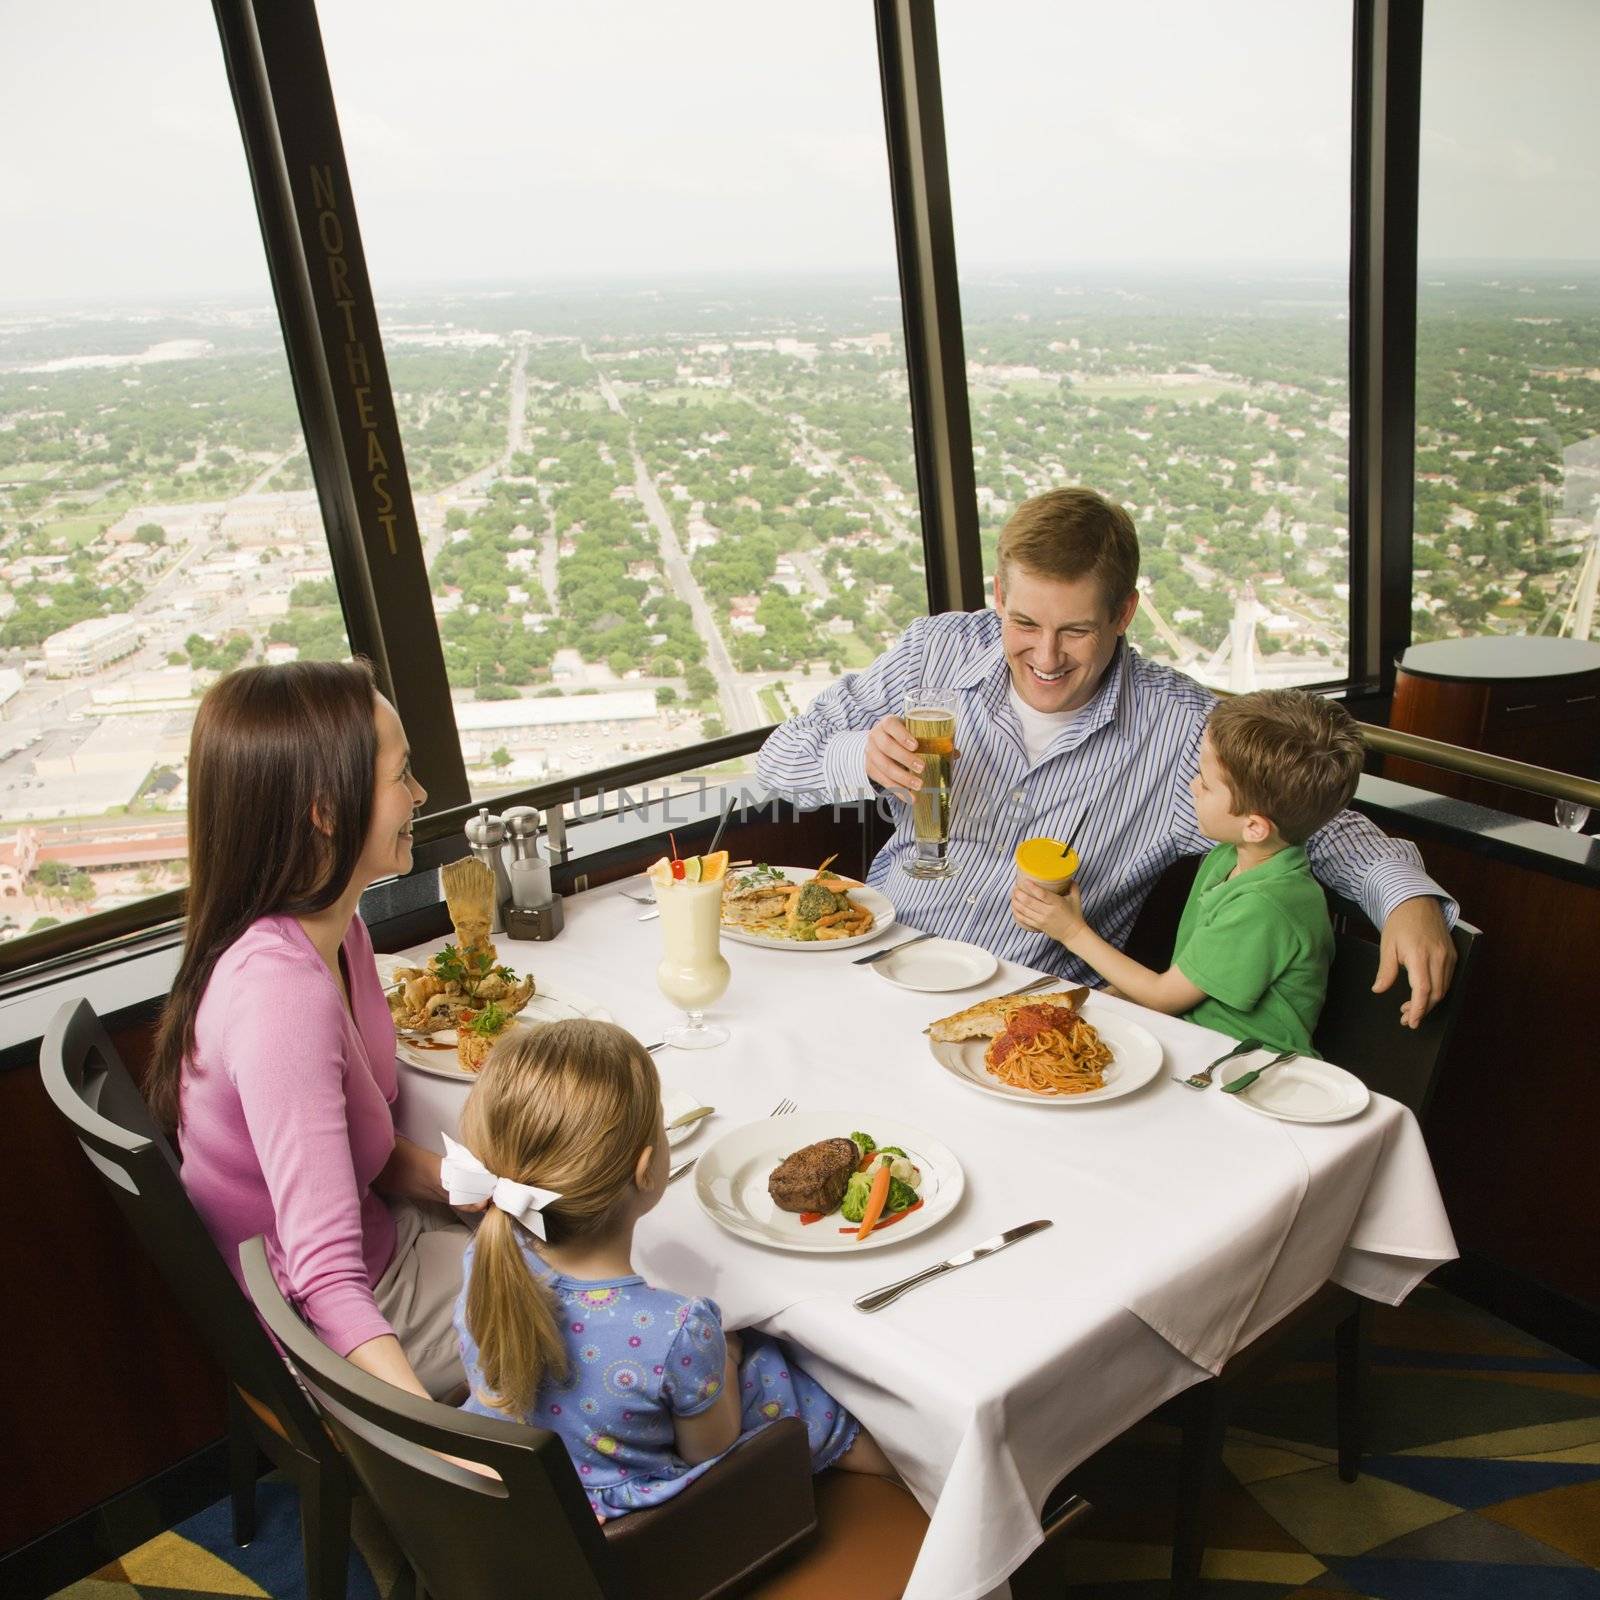 Caucasian family having dinner together at Tower of Americas restaurant in San Antonio, Texas.